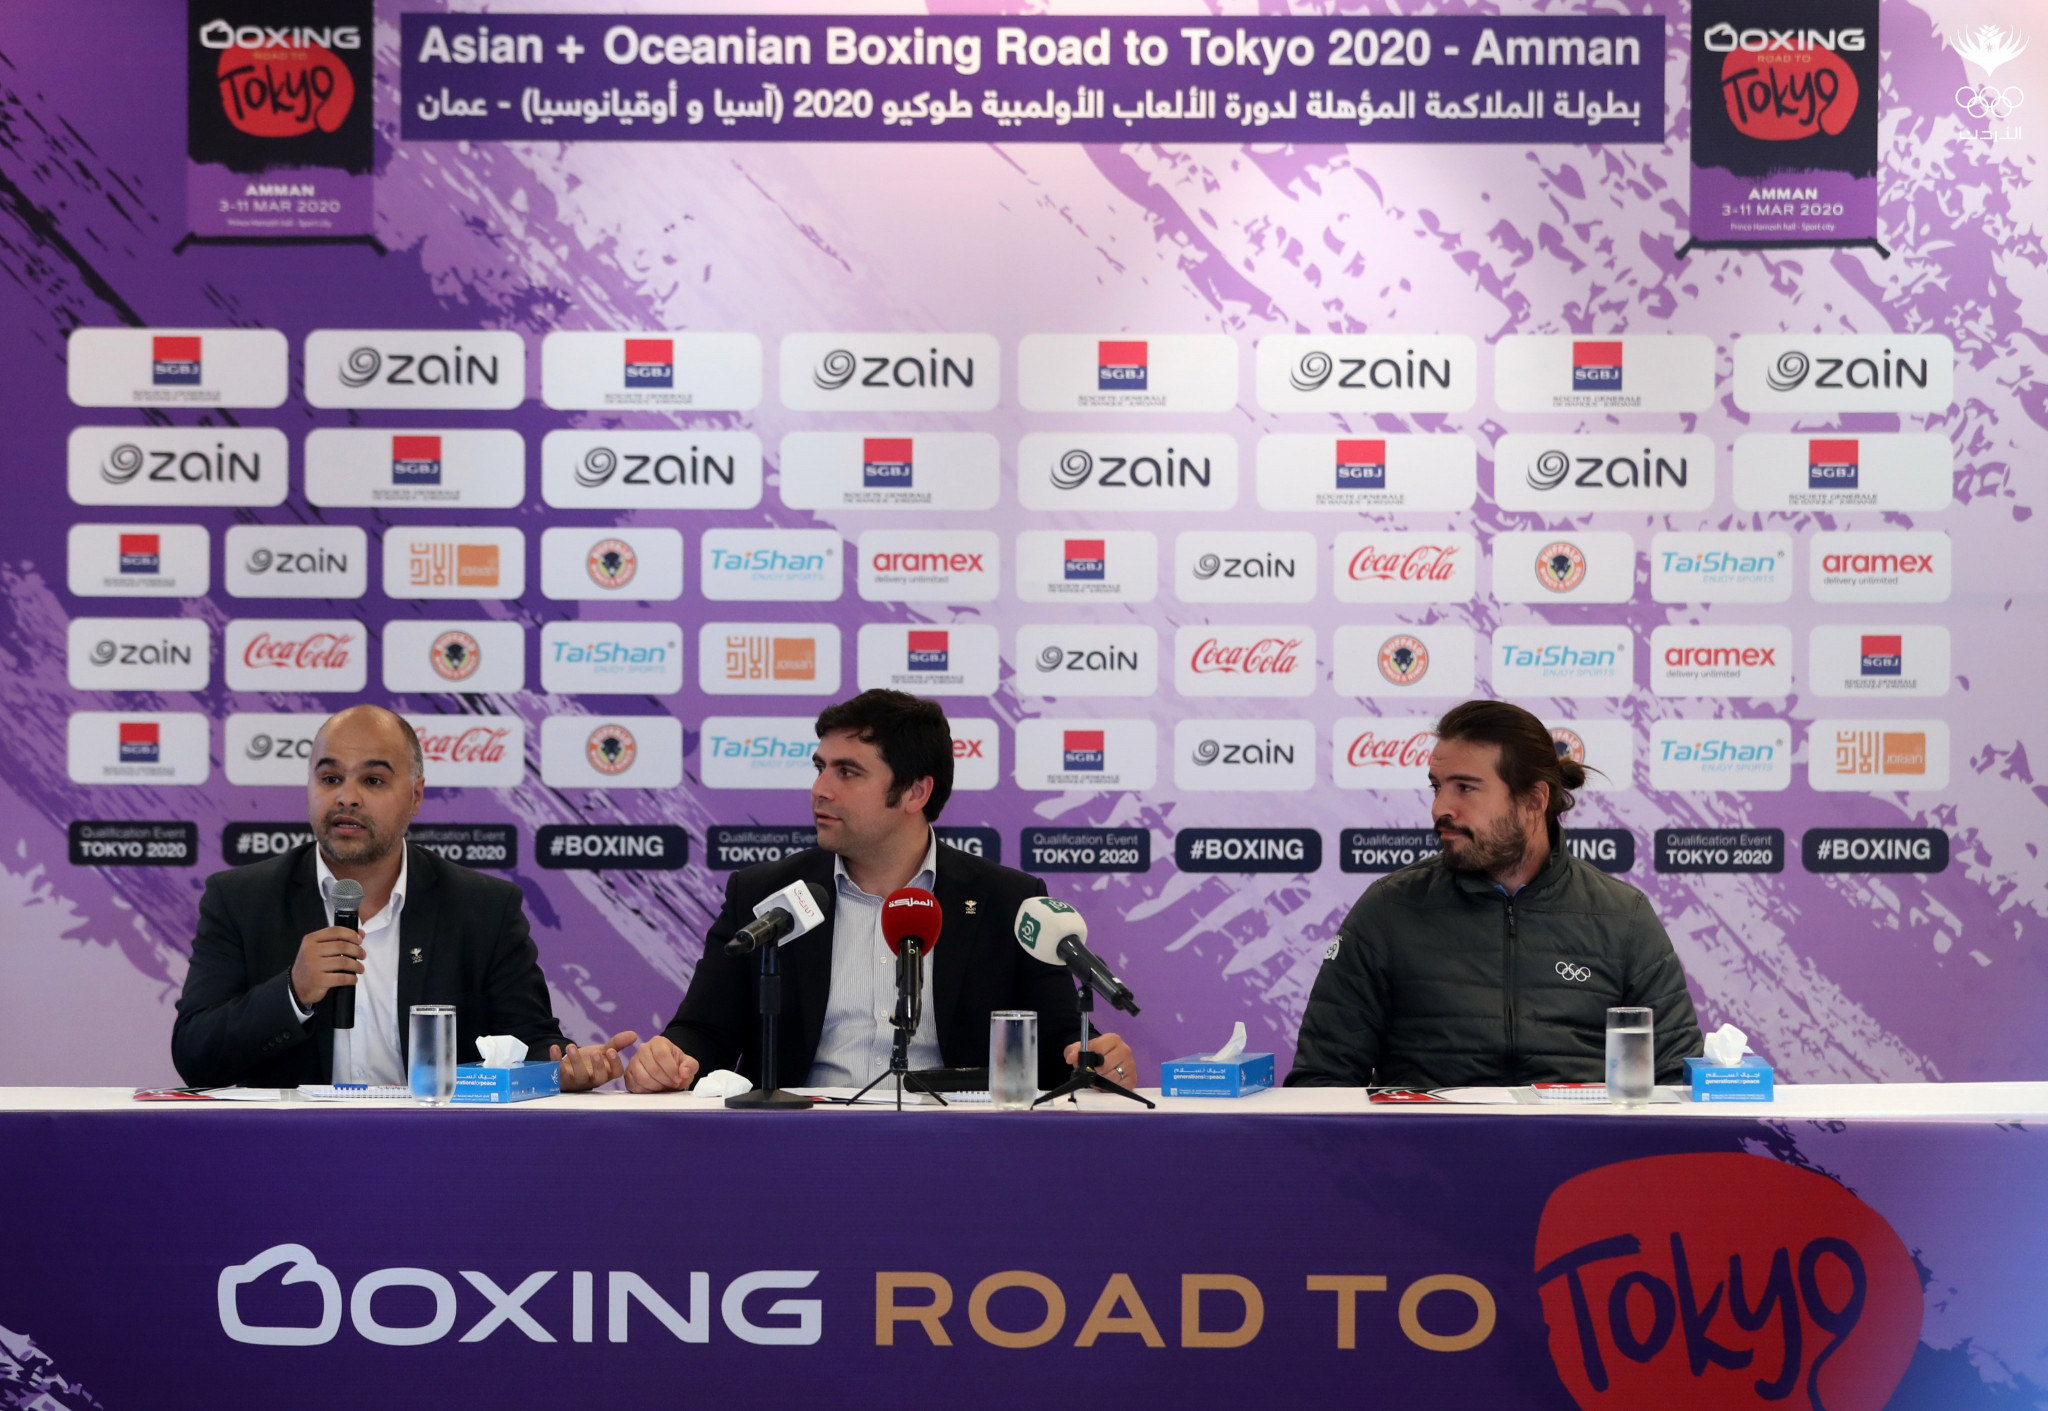 Sponsors sign-up to support rearranged Olympic boxing qualifier in Amman